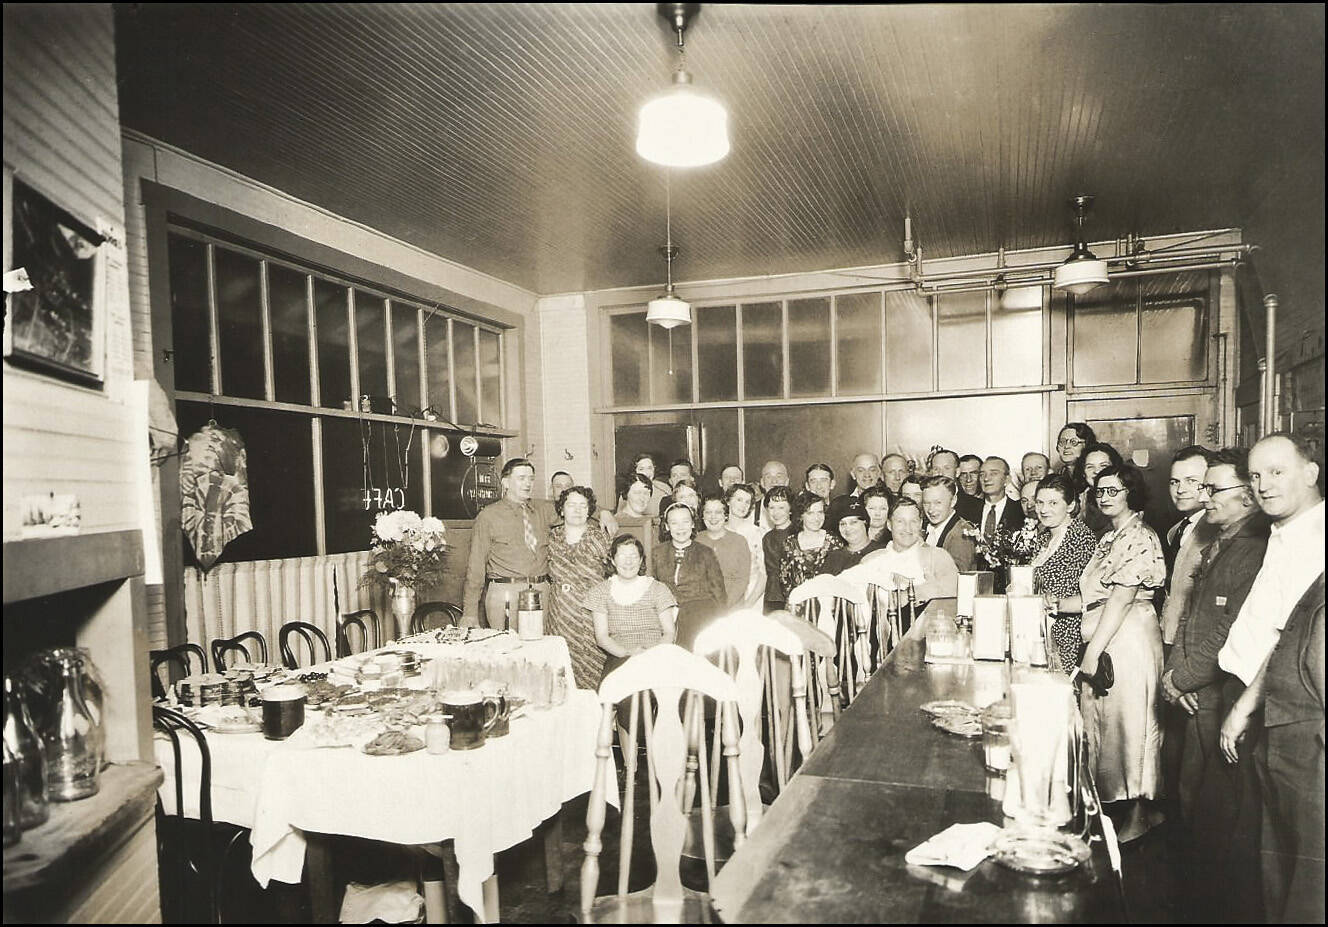 Ted and Rose Heyder once managed the hotel, restaurant, and bar. Here staff and maybe guests gathered for a photo in the restaurant on the bottom floor sometime in the 1930s.